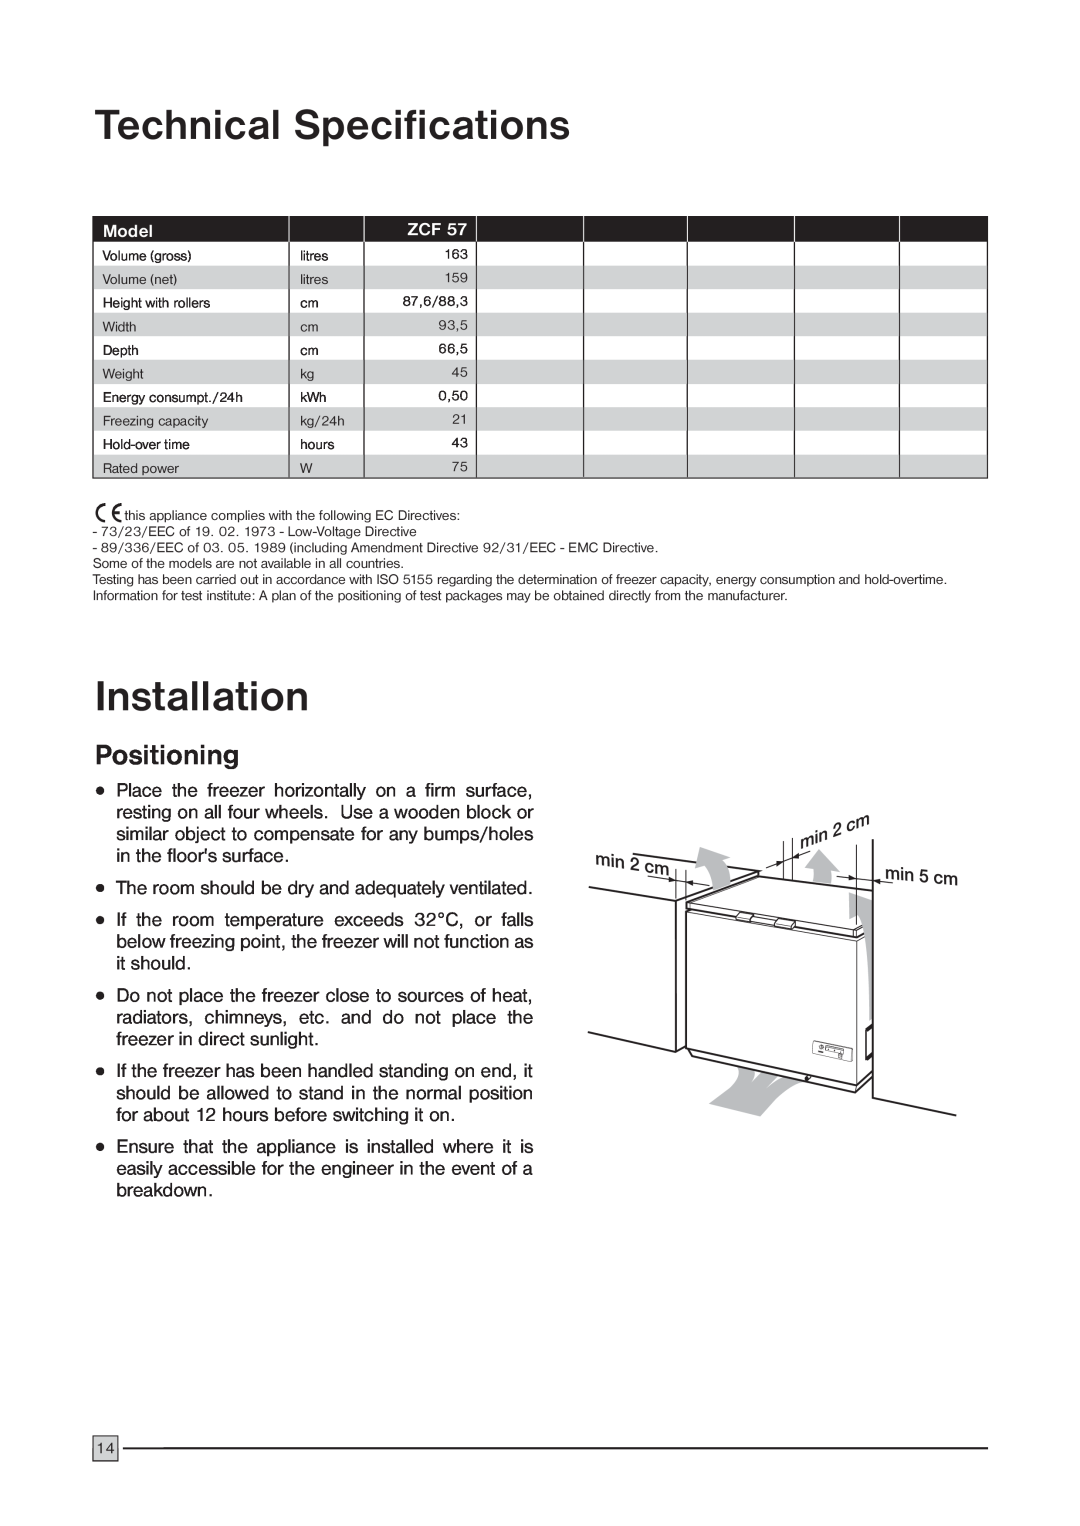 Zanussi ZCF 57 installation manual Technical Specifications, Installation, Positioning 